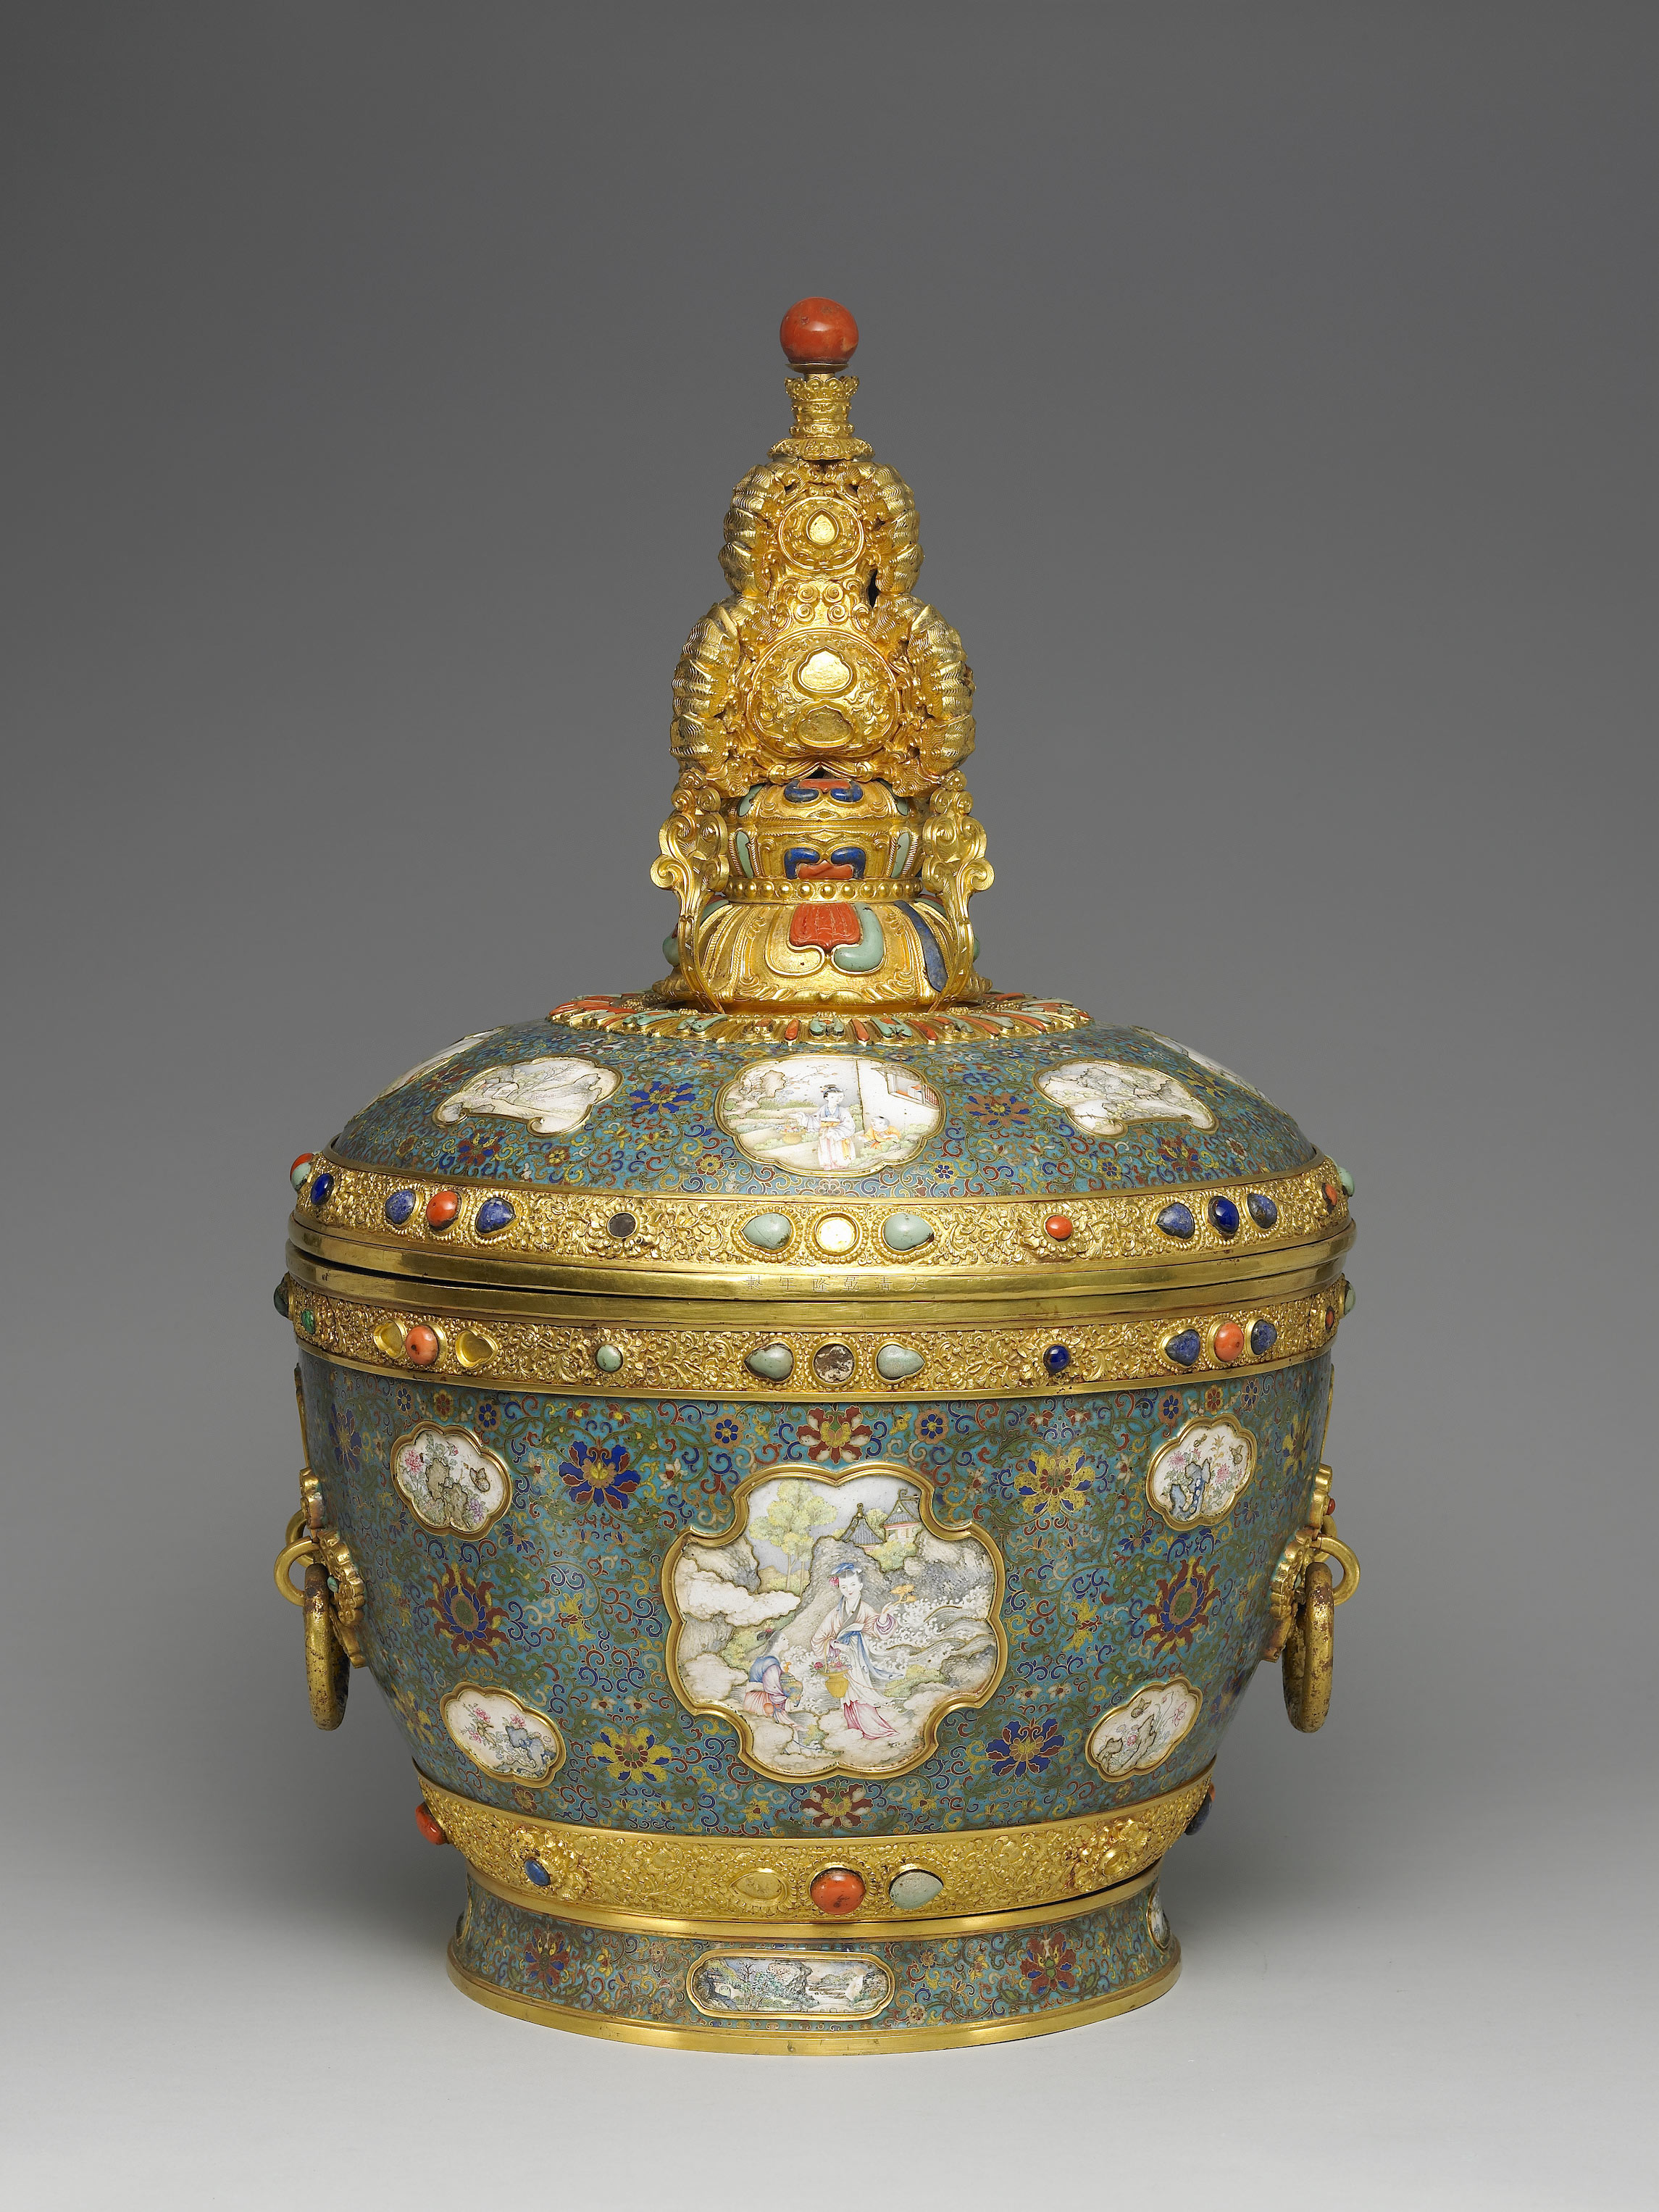 Curio in National Palace Museum, Qianlong reign (1736-1795), Qing dynasty